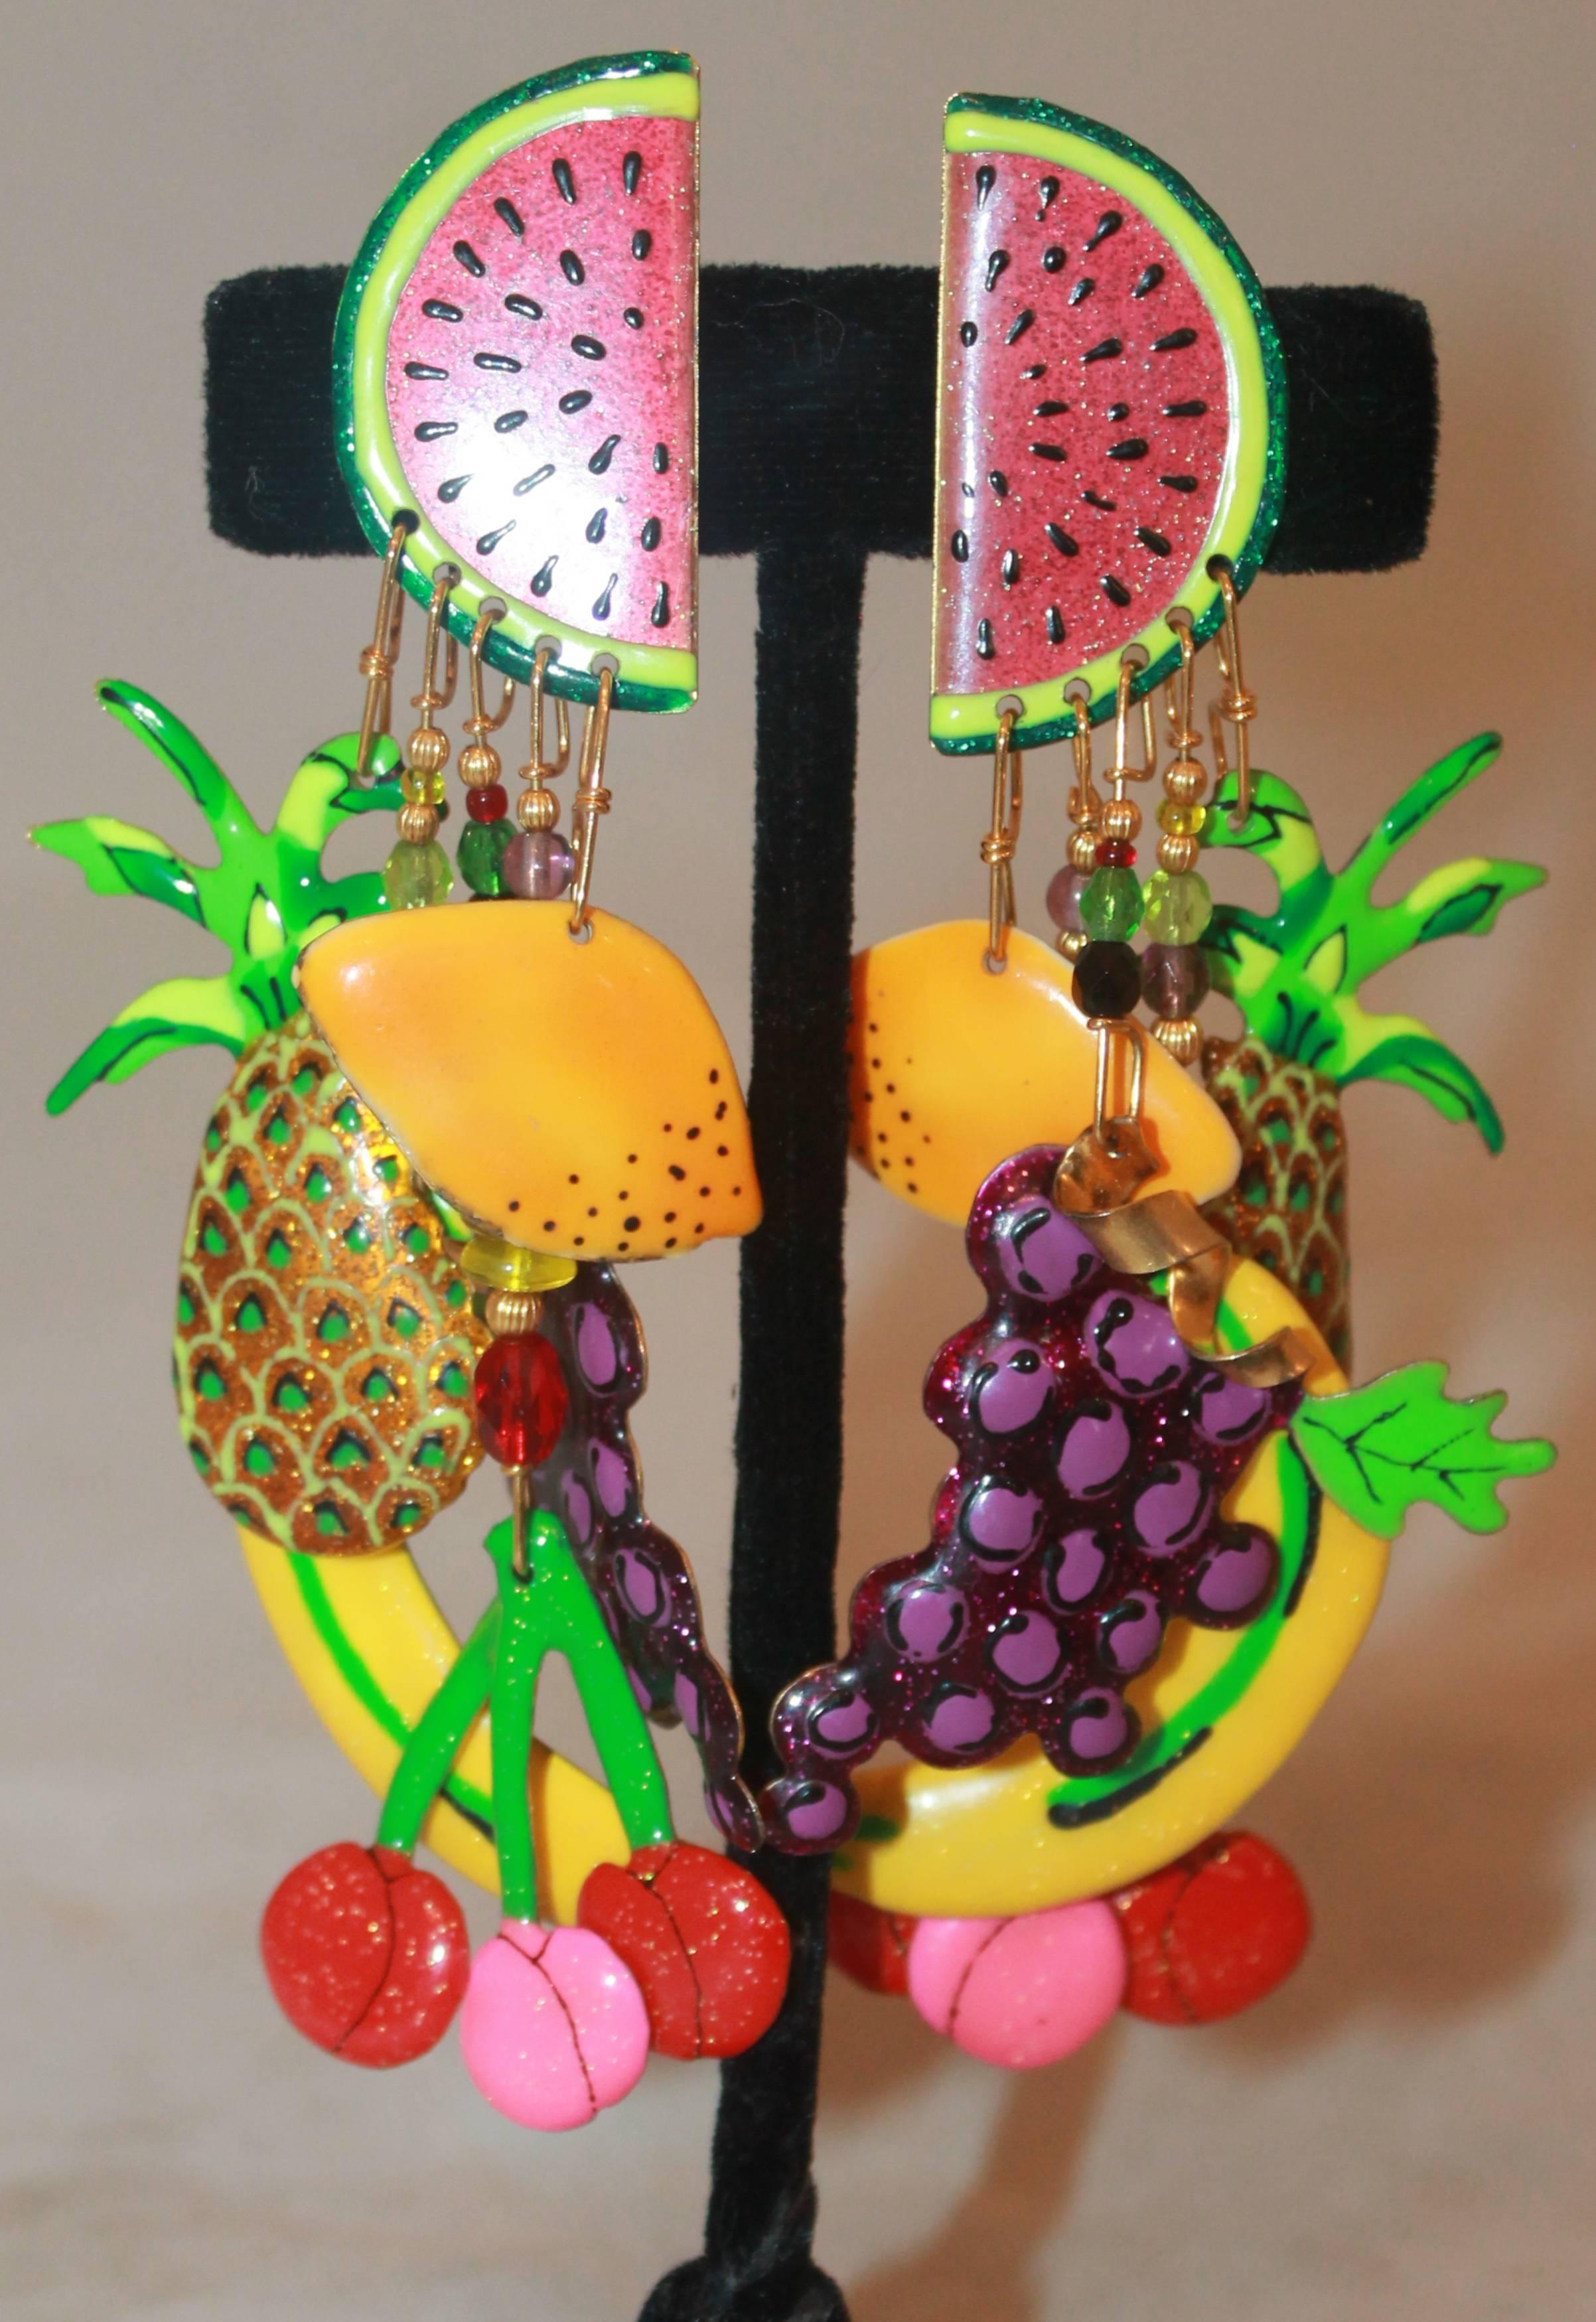 Lunch at the Ritz Multi-Colored Fruit Themed Dangle Clip-On Earrings-Circa 1990's.  These fun earrings are in excellent condition.  They feature a fruit theme including watermelon, cherries, grapes, bananas, pineapples, and oranges.  The enamel has